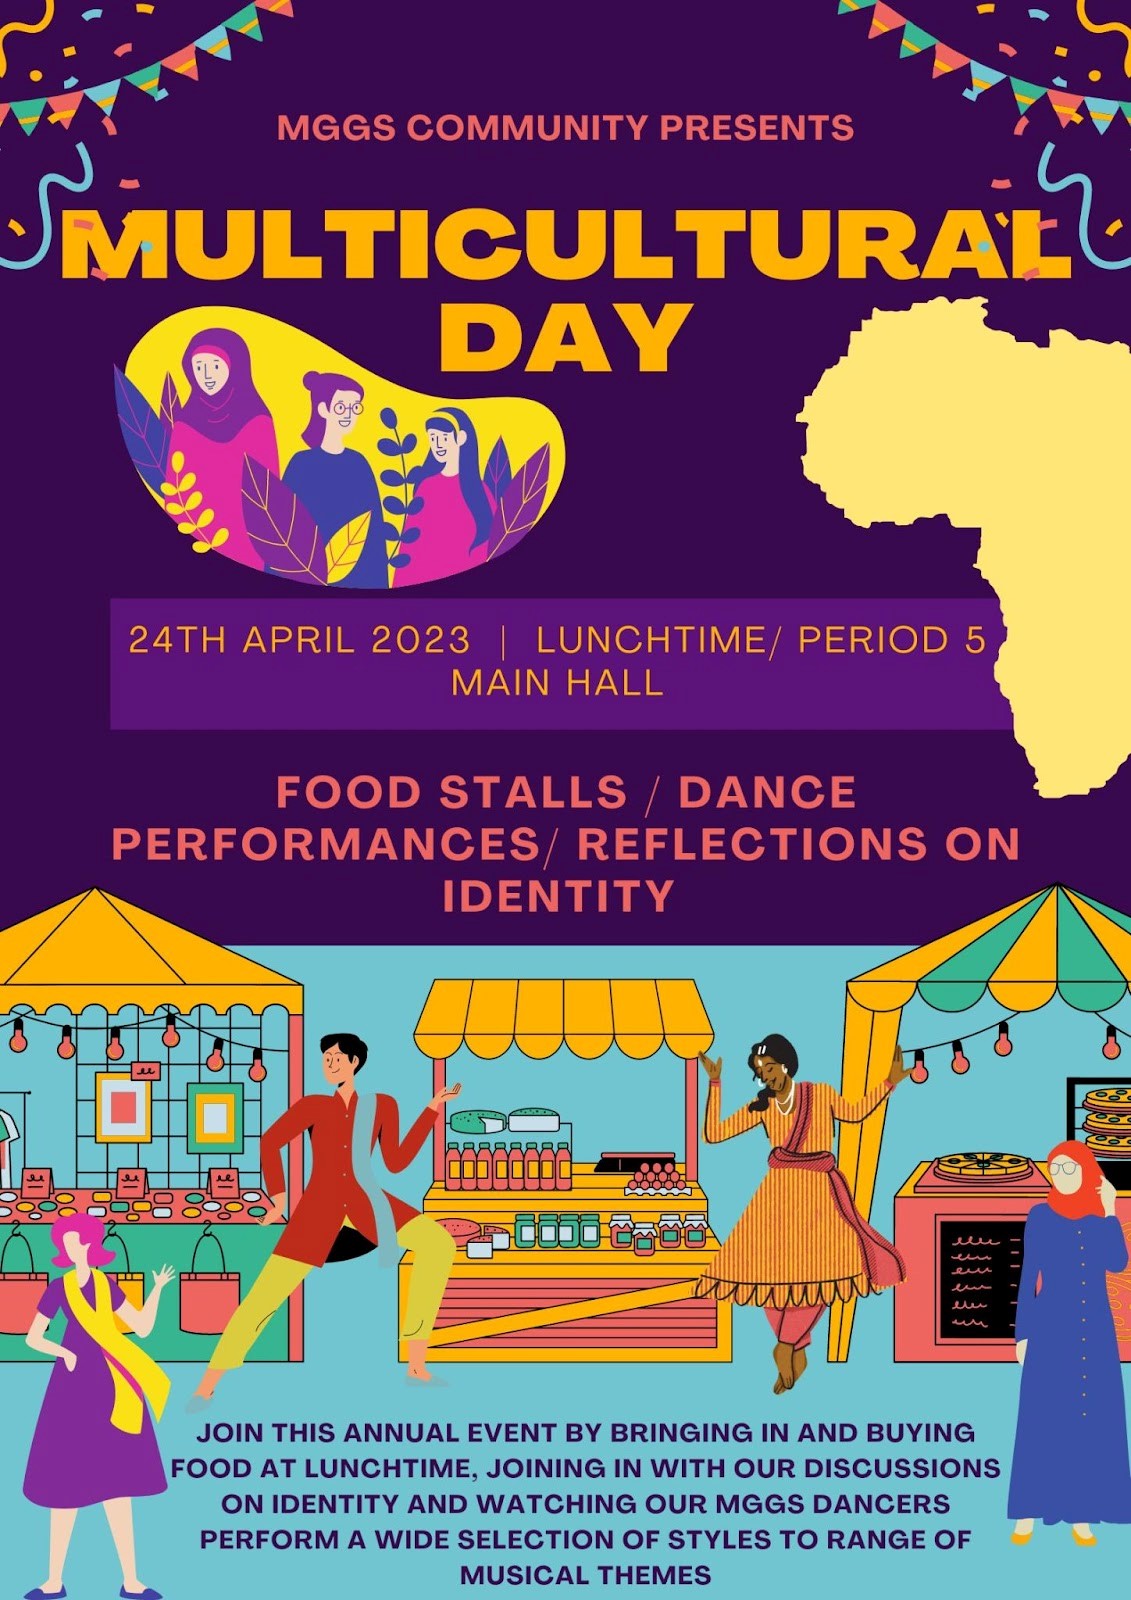 Non-School Uniform - Multicultural Day 24th April 2023 at mggs